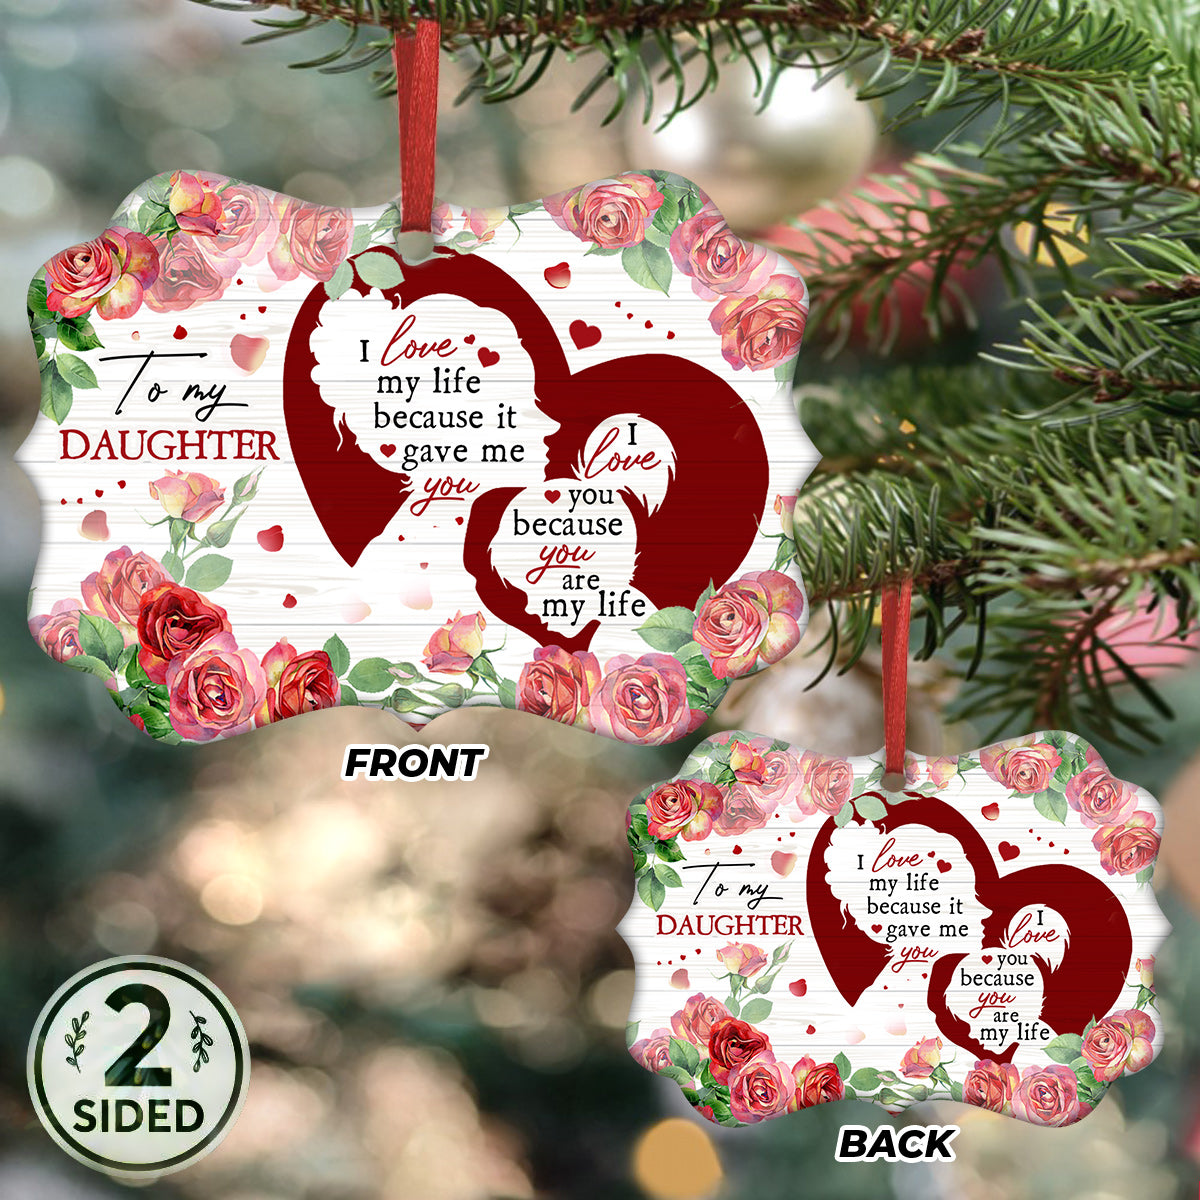  Rose To My Daughter Metal Ornament - Christmas Ornament - Christmas Gift